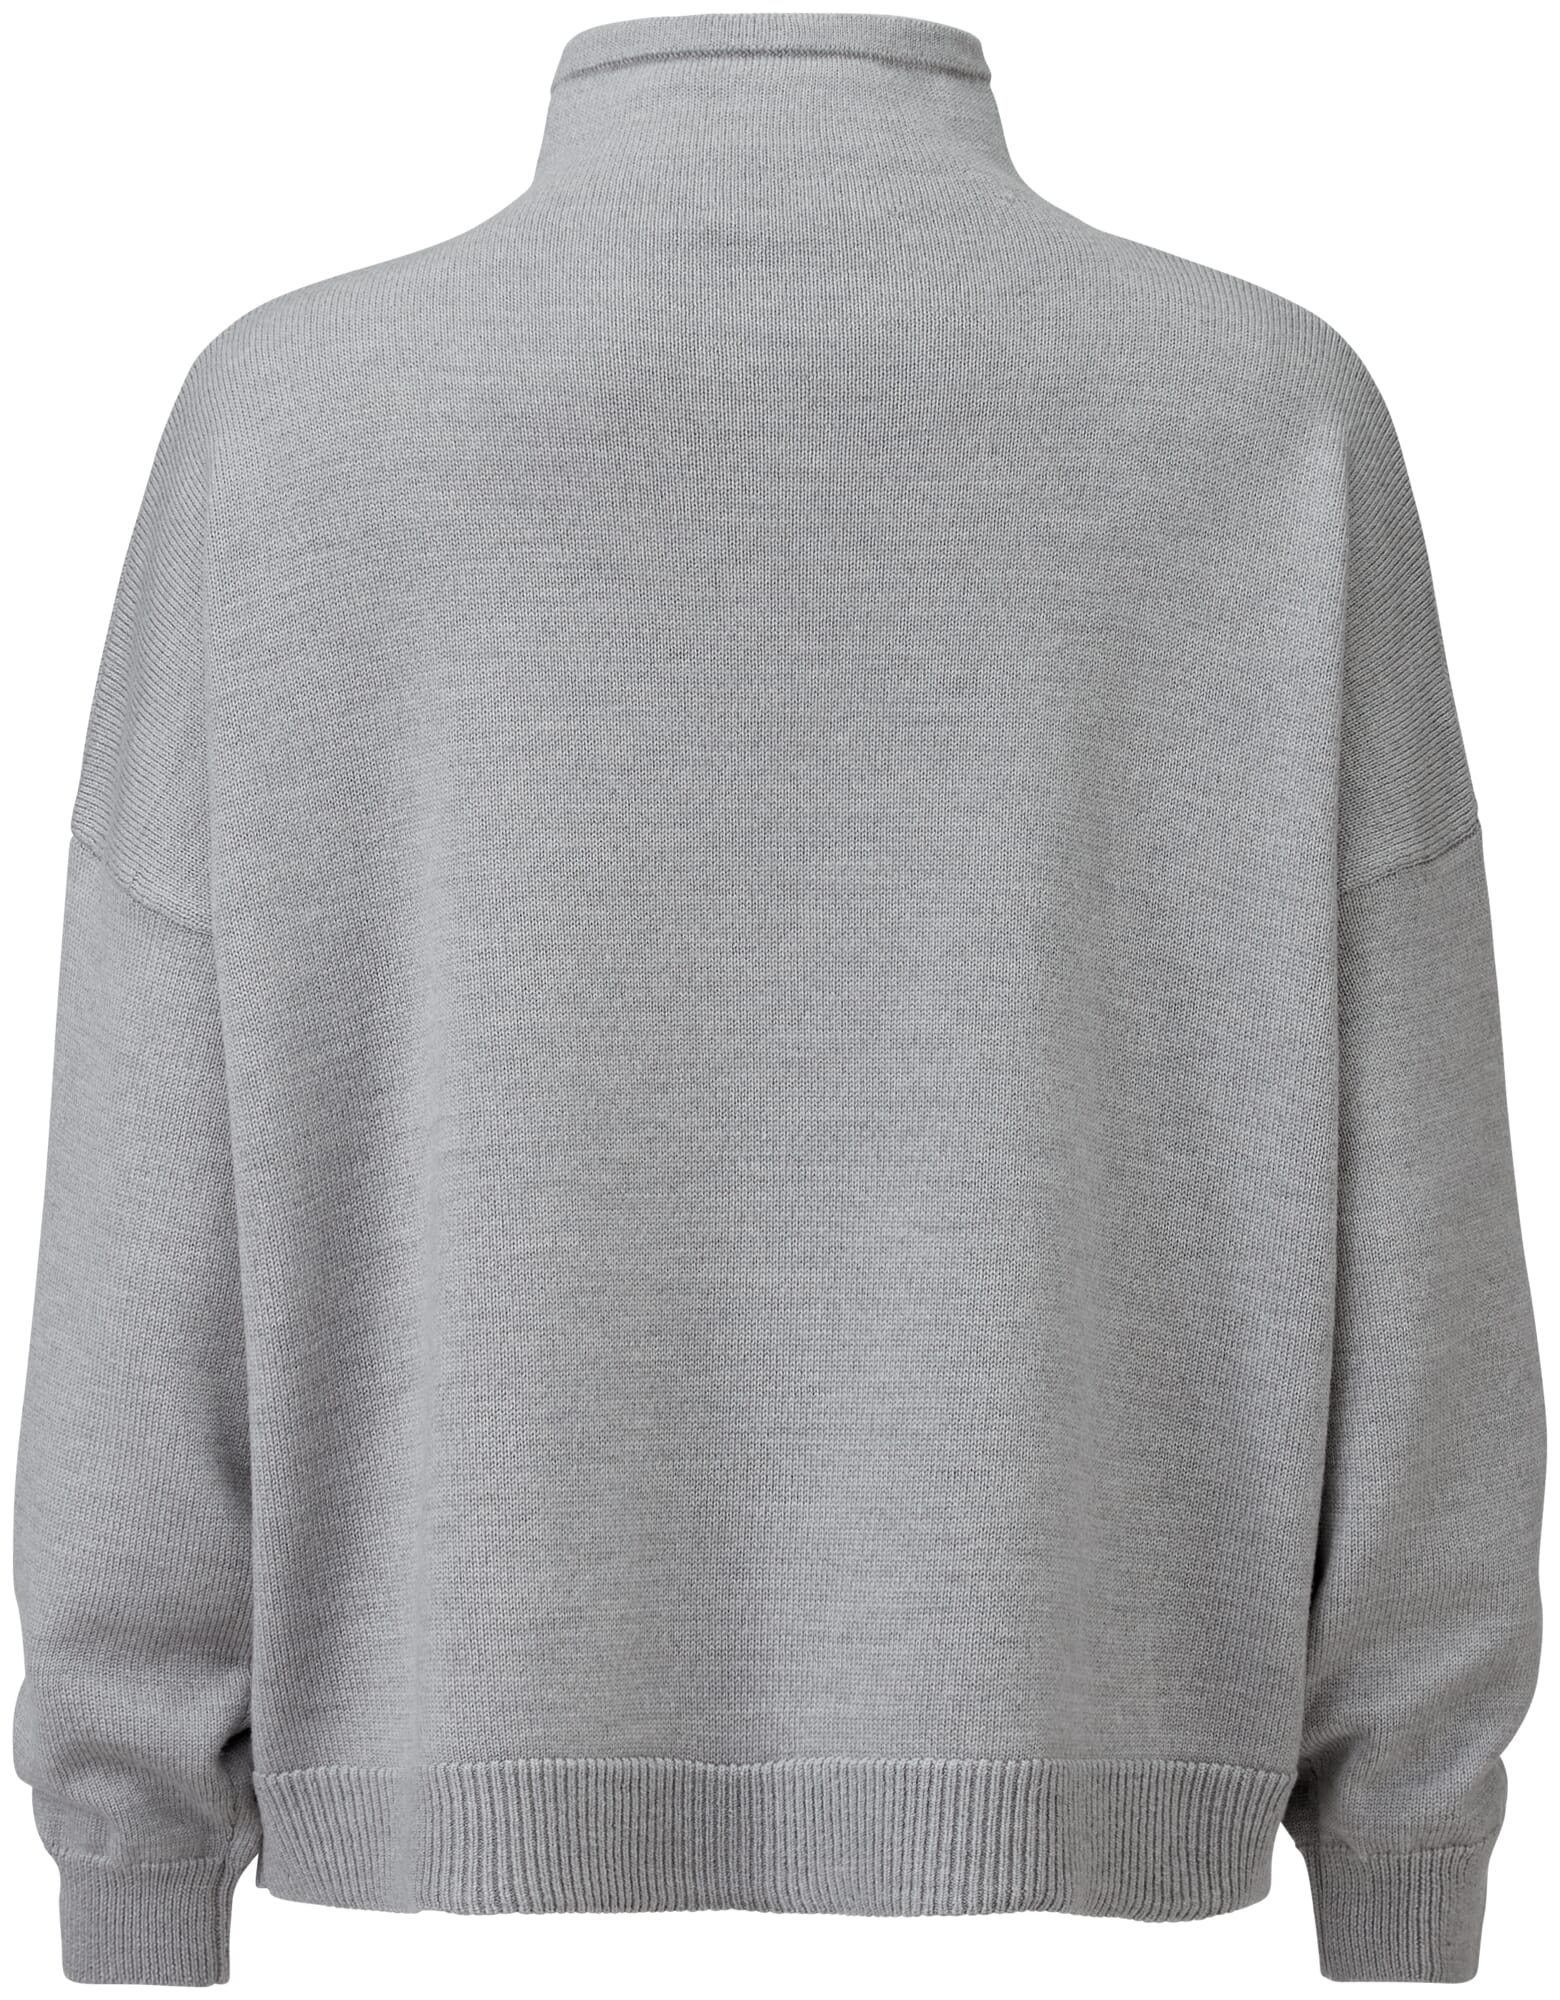 Women's Swoop Slouch Collar Sweater - Charcoal Grey Marl